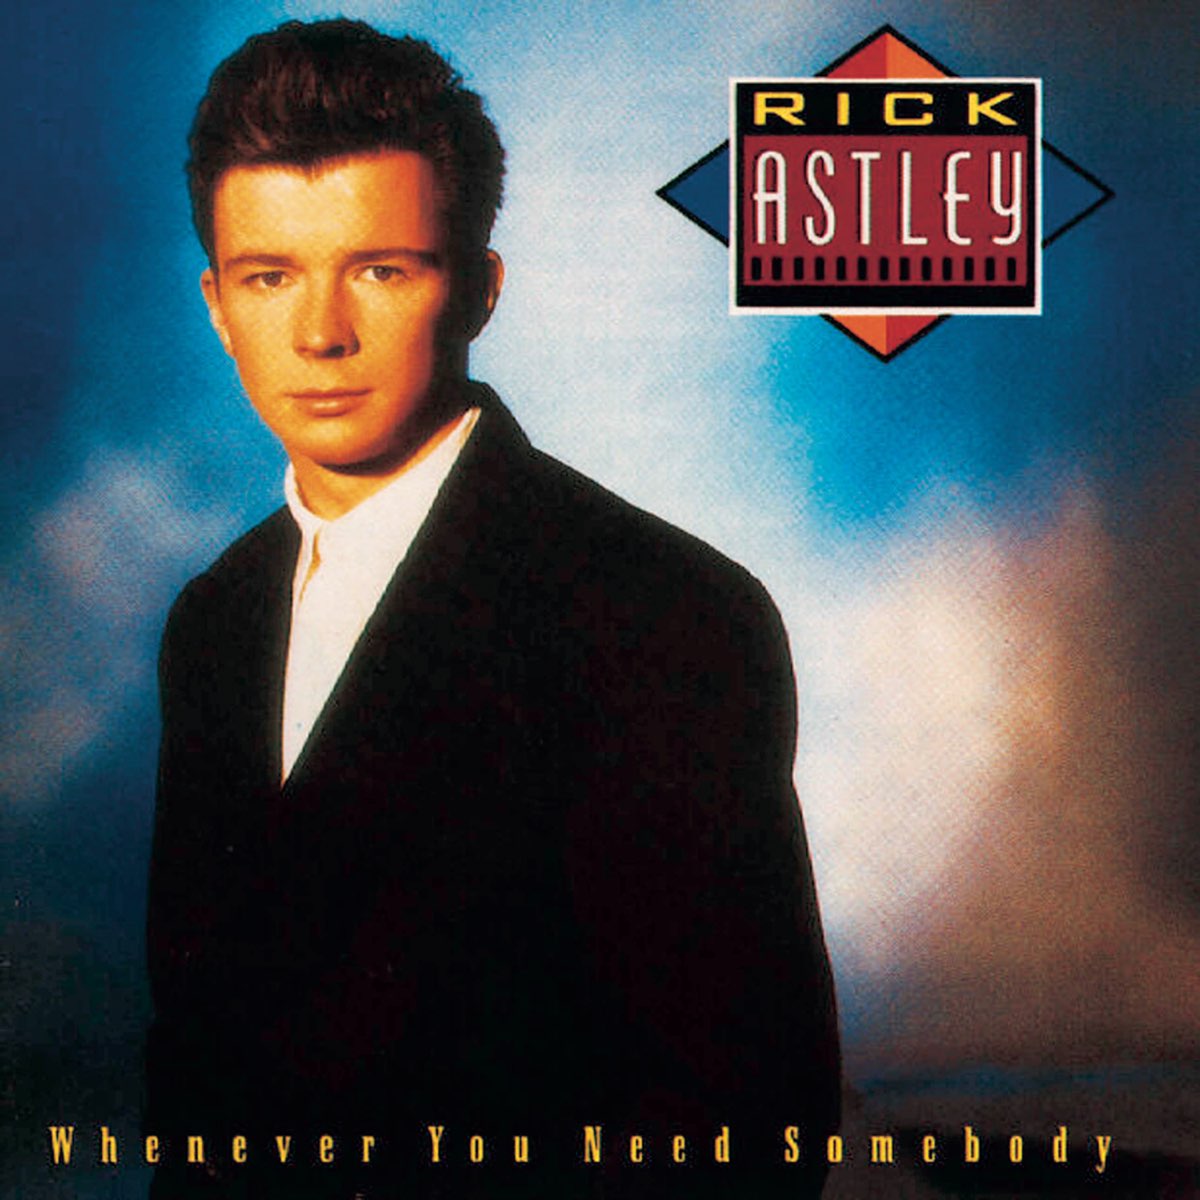 Whenever You Need Somebody by Rick Astley on Apple Music